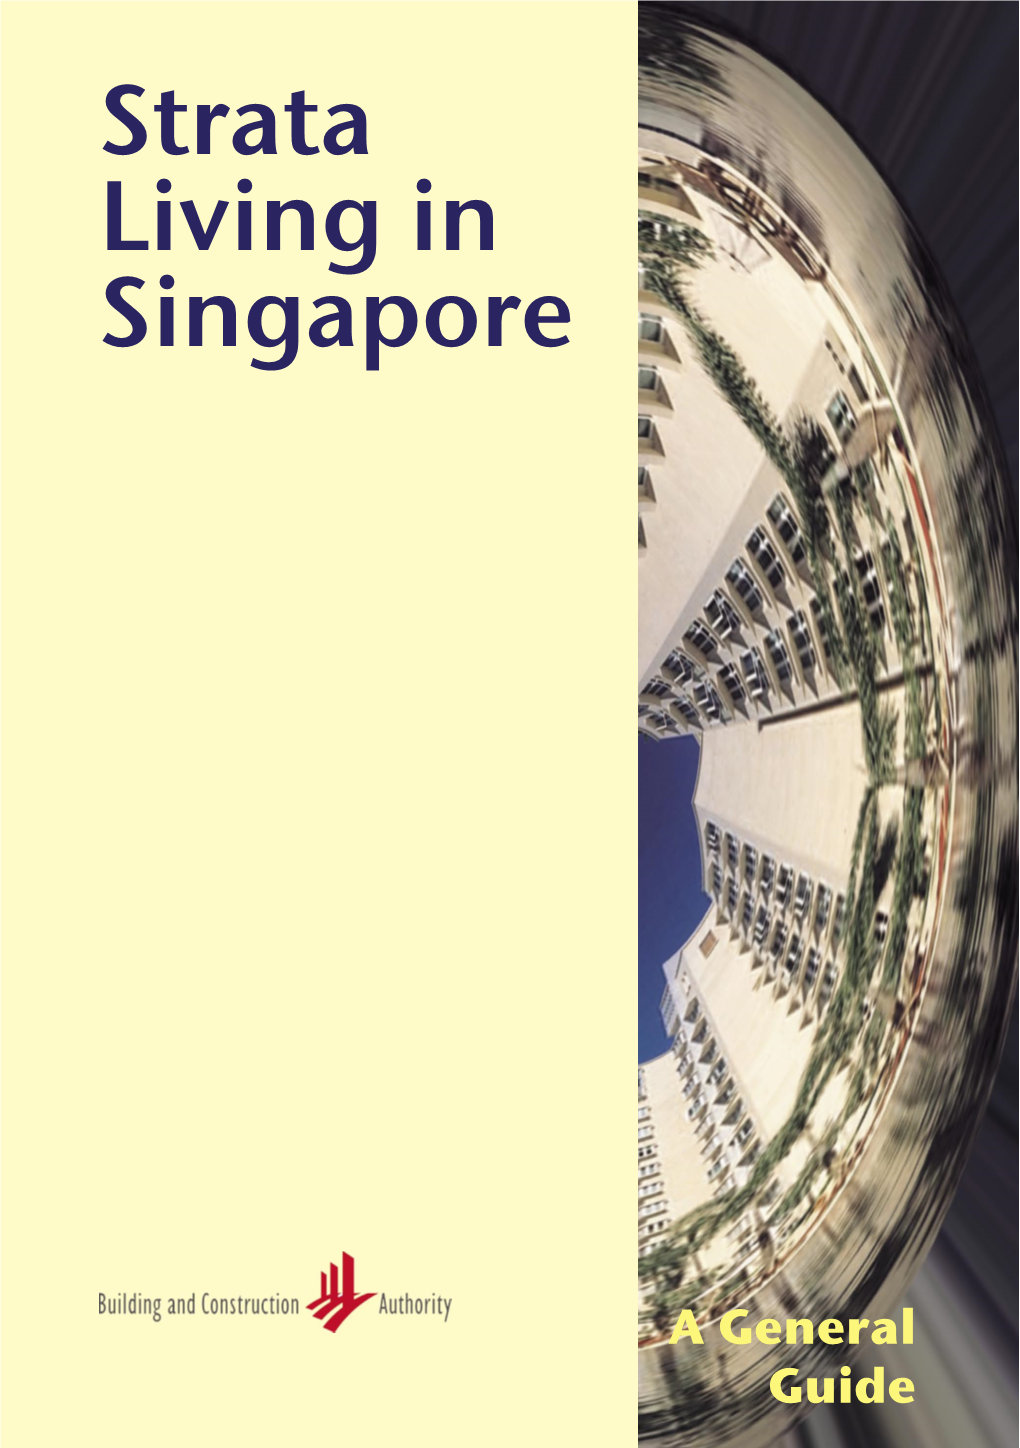 Strata Living in Singapore – a General Guide